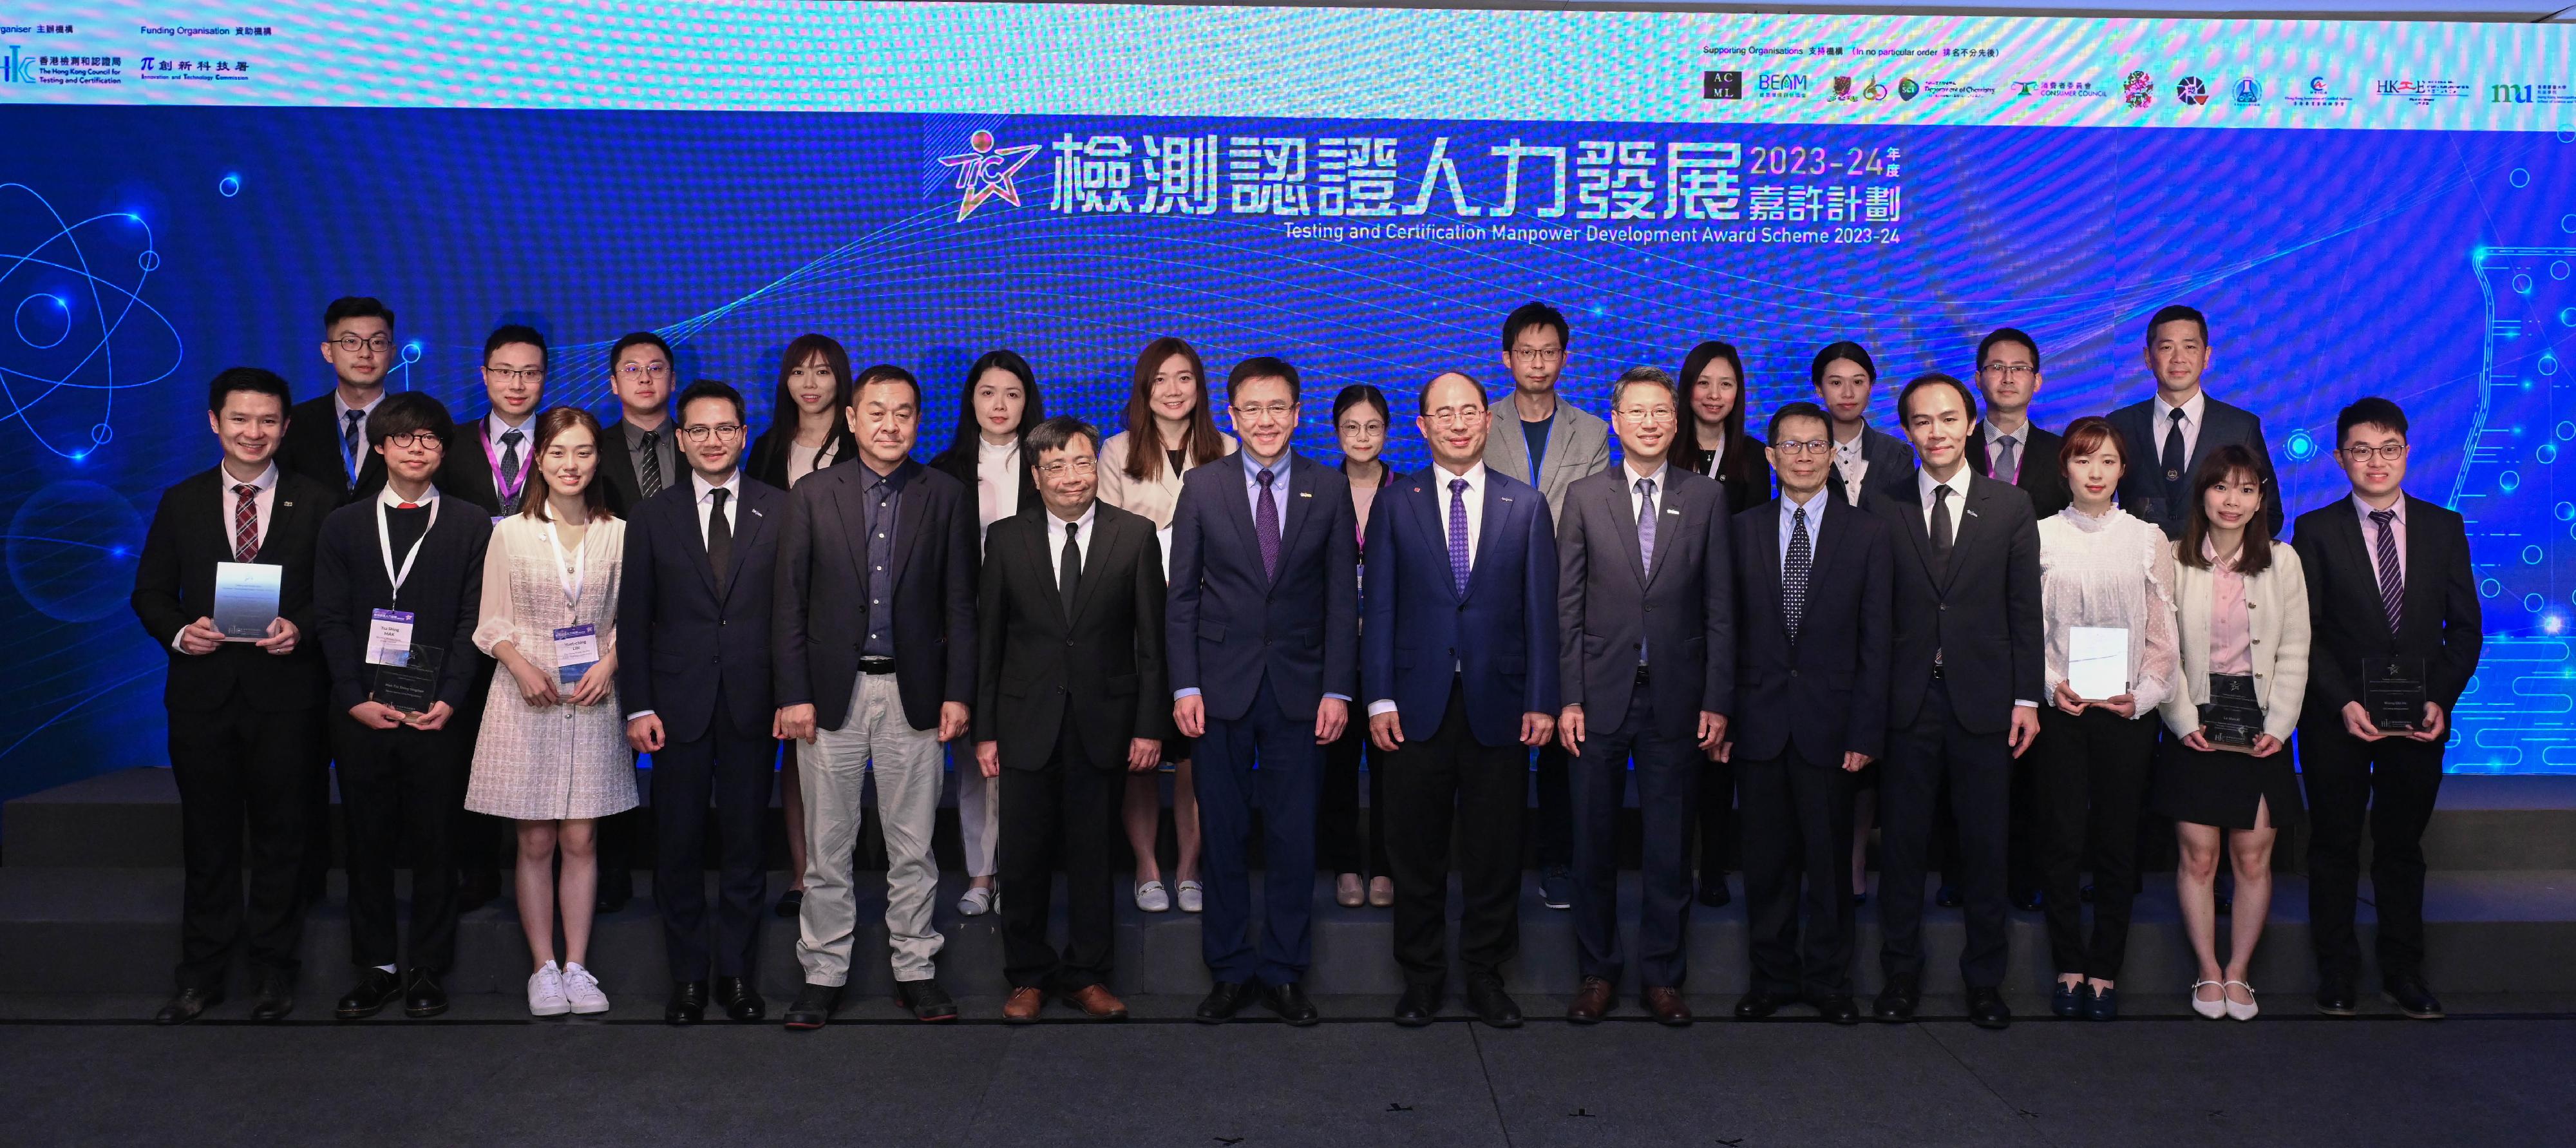 Organised by the Hong Kong Council for Testing and Certification (HKCTC) with full support from the Innovation and Technology Commission, the Testing and Certification Manpower Development Award Scheme 2023-24 award presentation ceremony was held today (December 4). Photo shows the Secretary for Innovation, Technology and Industry, Professor Sun Dong (front row, seventh left); the Permanent Secretary for Innovation, Technology and Industry, Mr Eddie Mak (front row, sixth right); the Commissioner for Innovation and Technology, Mr Ivan Lee (front row, sixth left); the Chairman of the HKCTC, Professor Wong Wing-tak (front row, seventh right); the Assessment Panel Chairman, Mr Robert Lui (front row, fourth right), and other guests with the Professional Awardees.